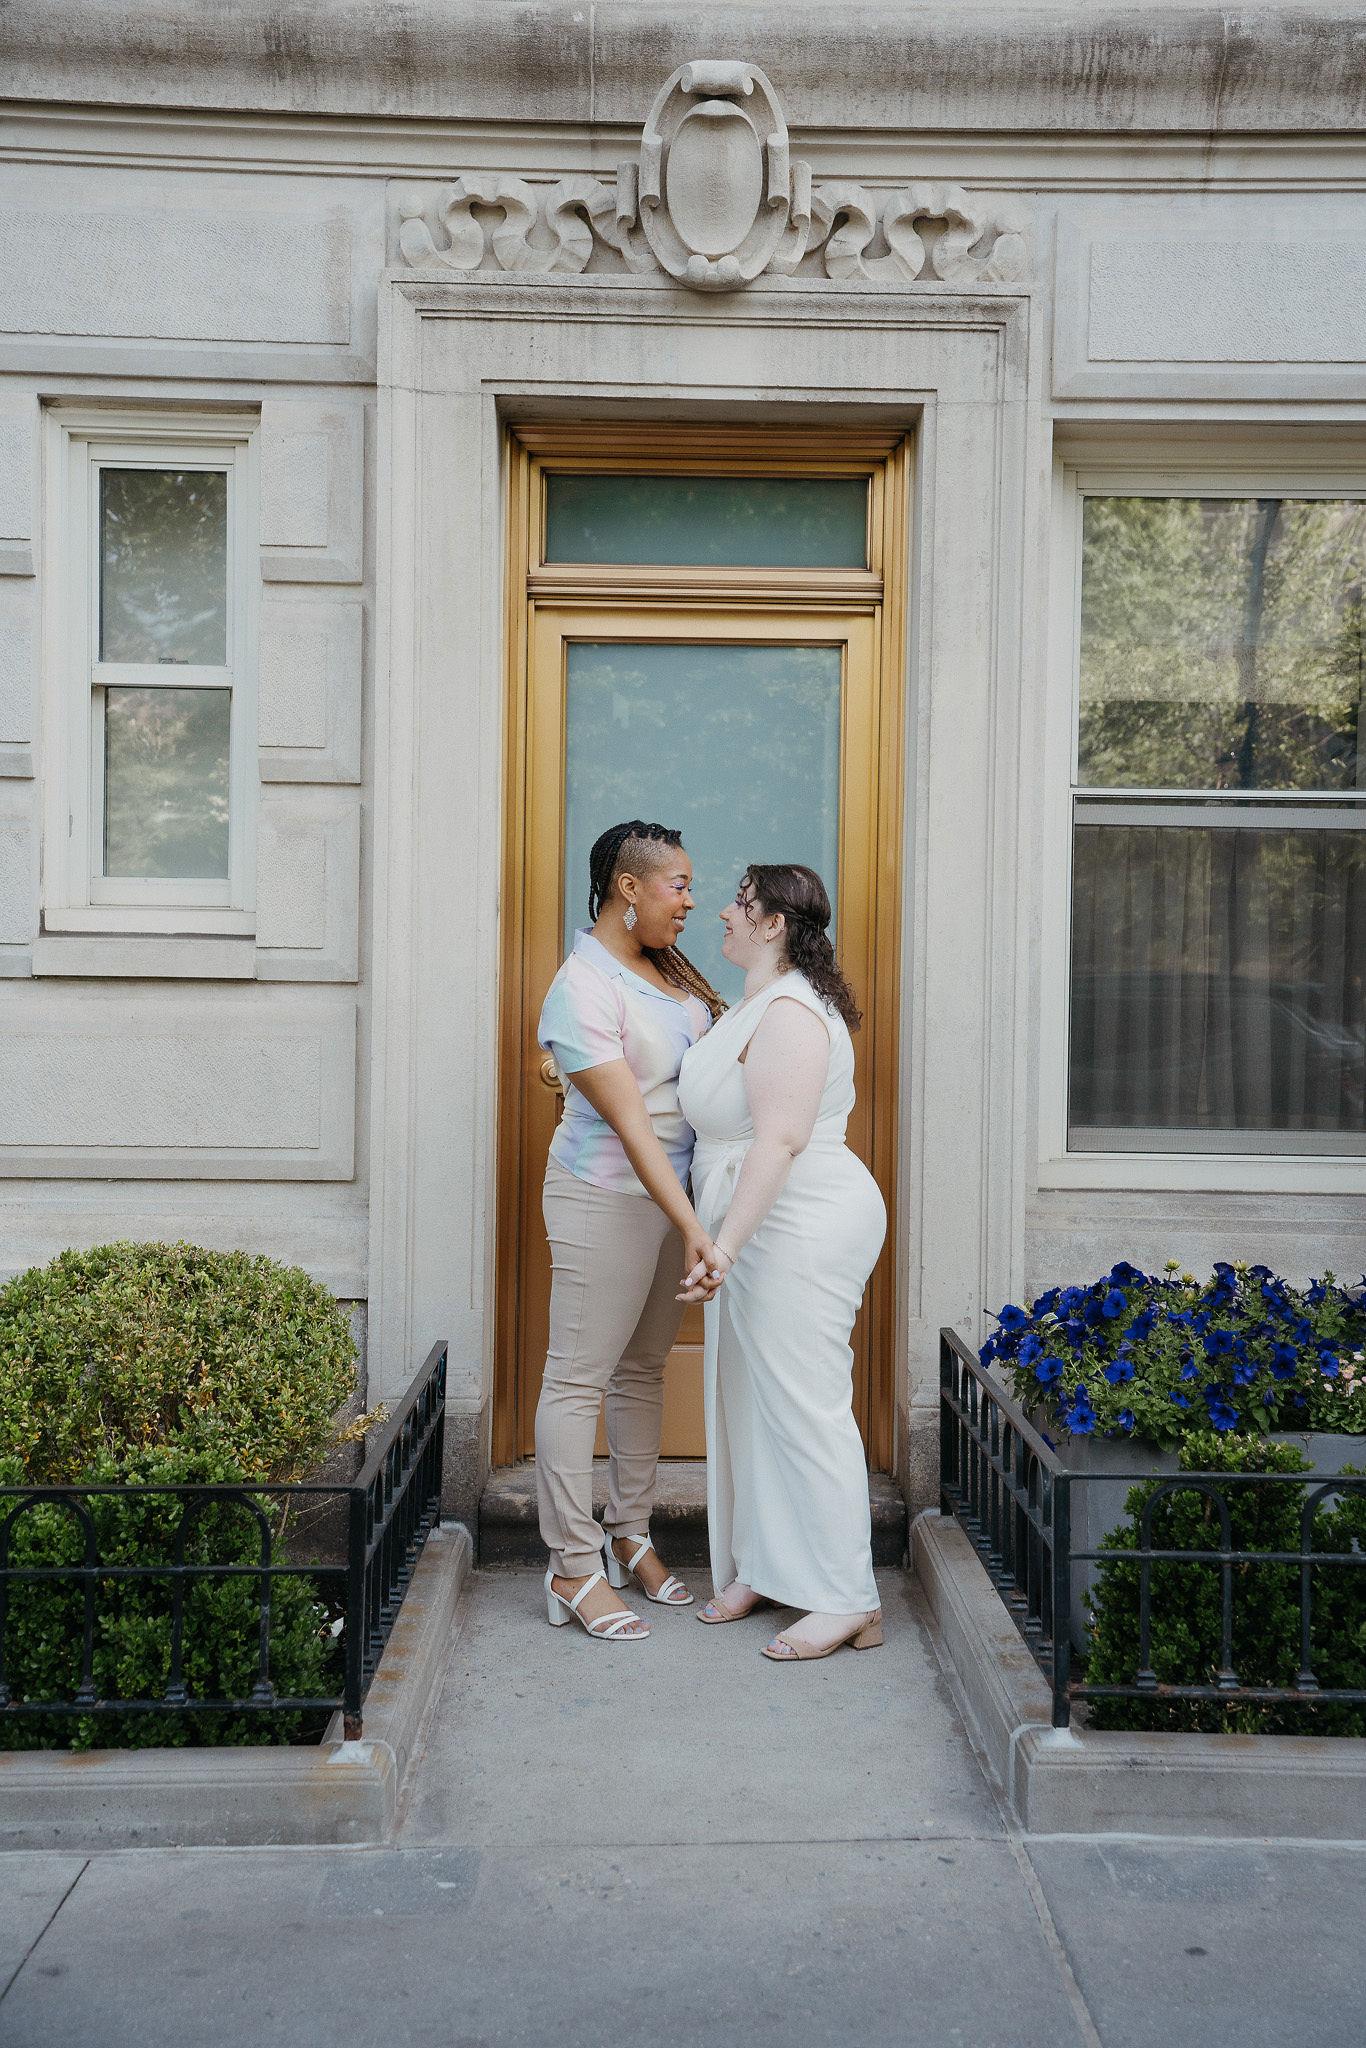 The Wedding Website of Nicole Trench and Maria Kervran